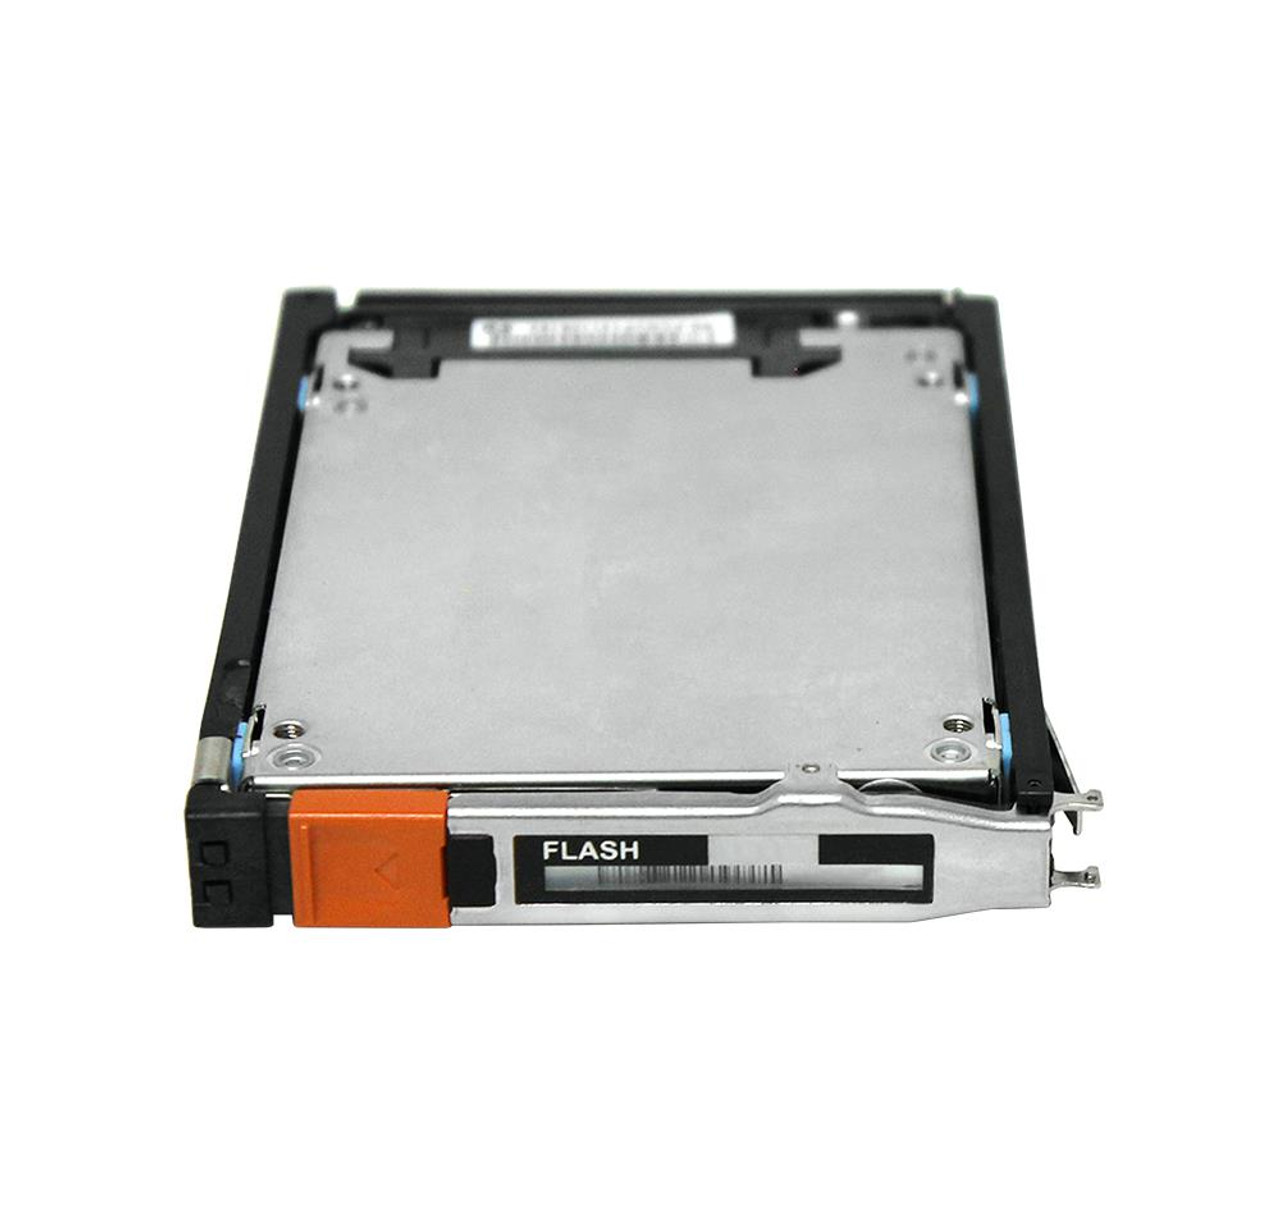 005051747 EMC 1.92TB SAS 12Gbps 2.5-inch Internal Solid State Drive (SSD)